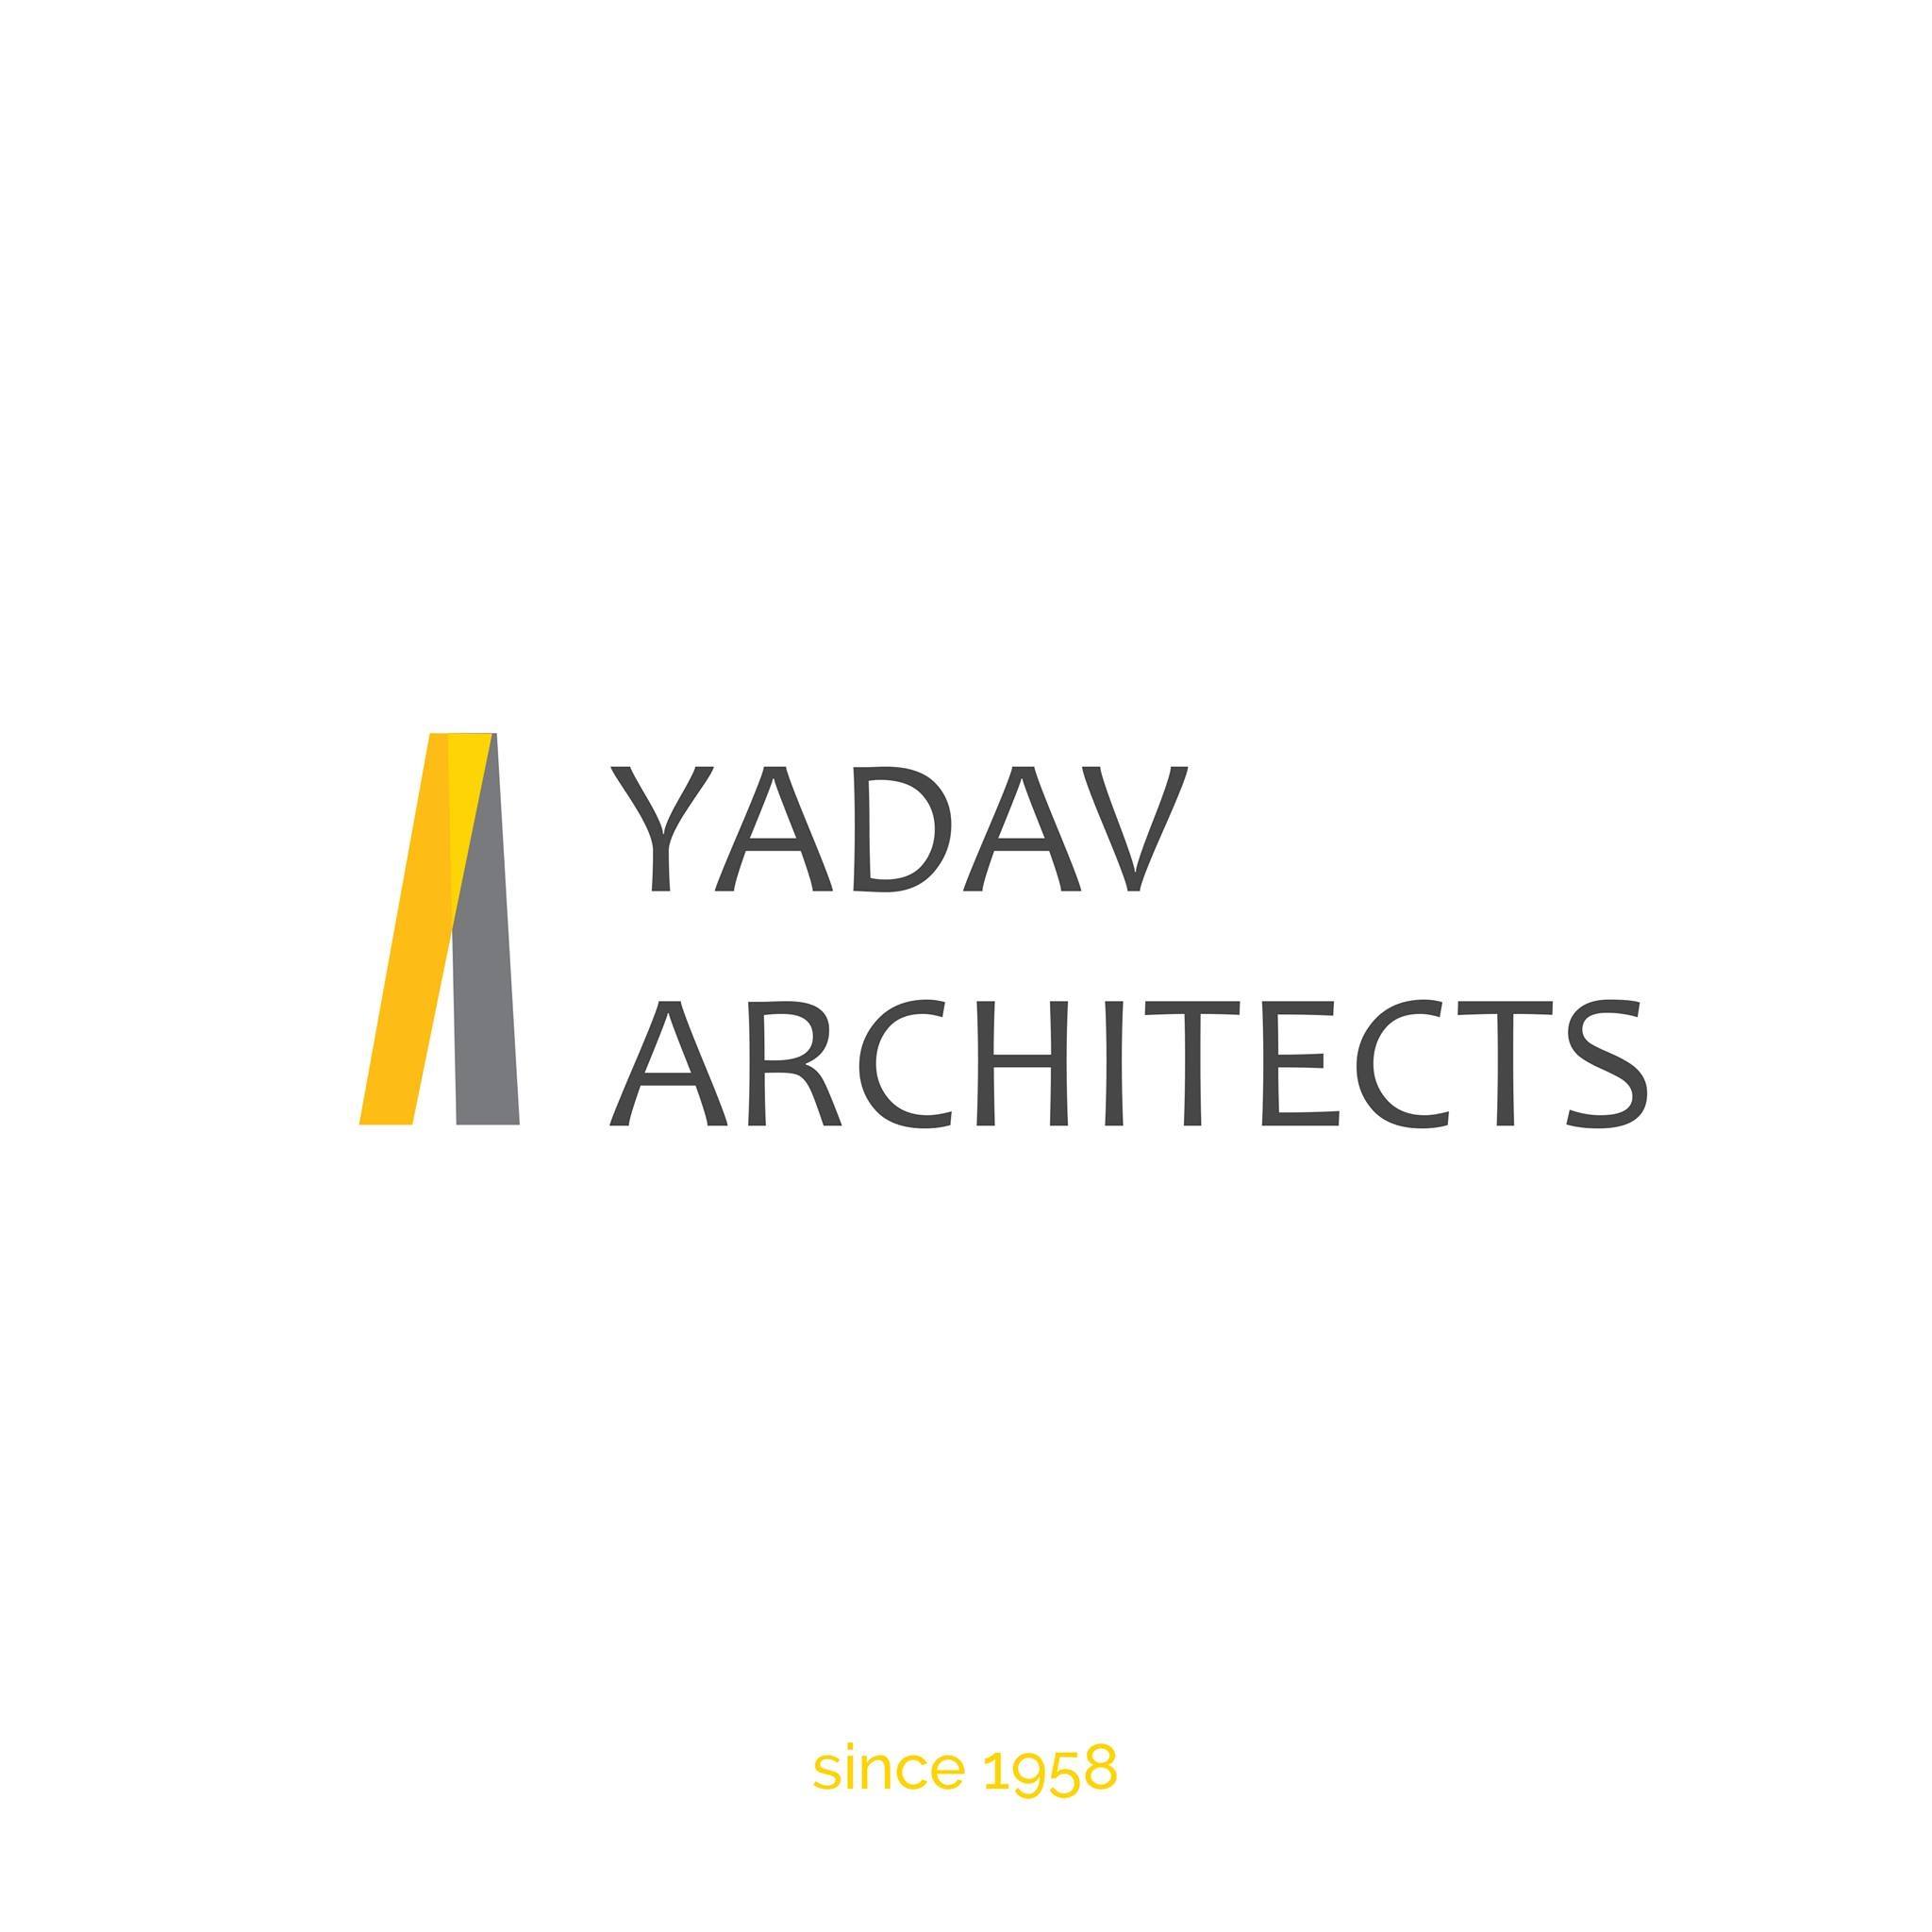 Yadav Architects|IT Services|Professional Services